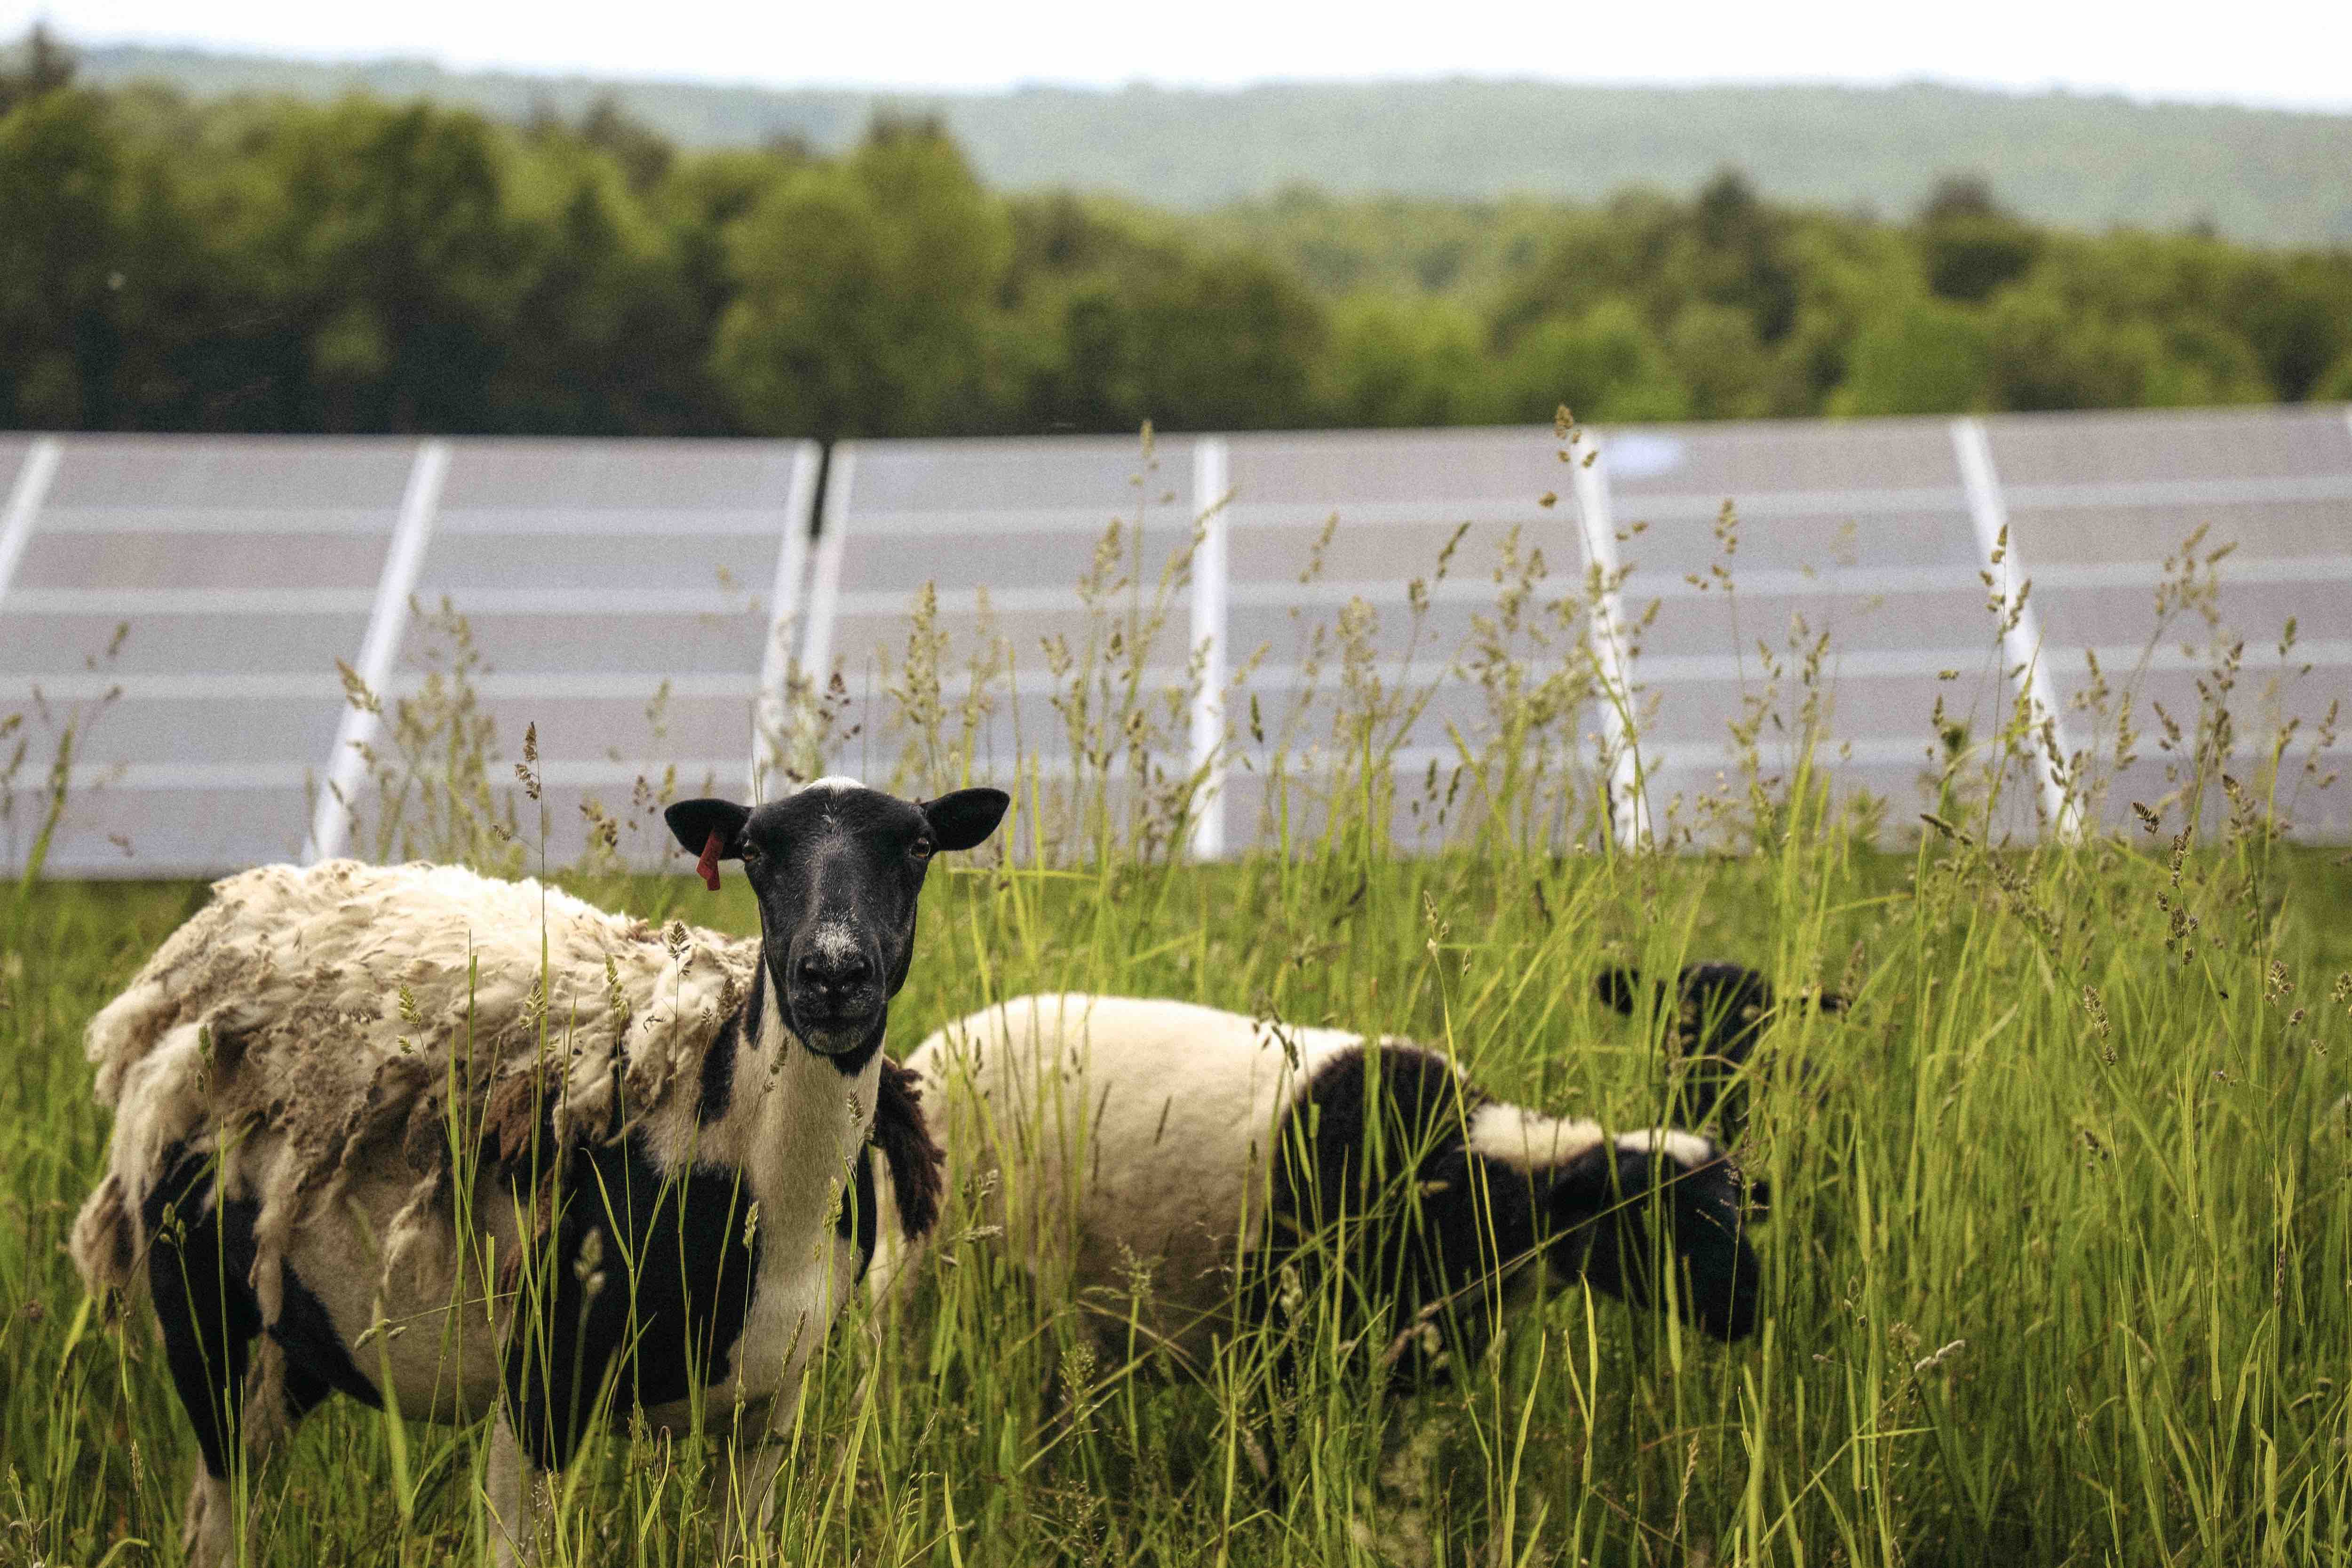  Two white-and-black sheep graze in a field in front of a large solar array with trees and mountains in the background.